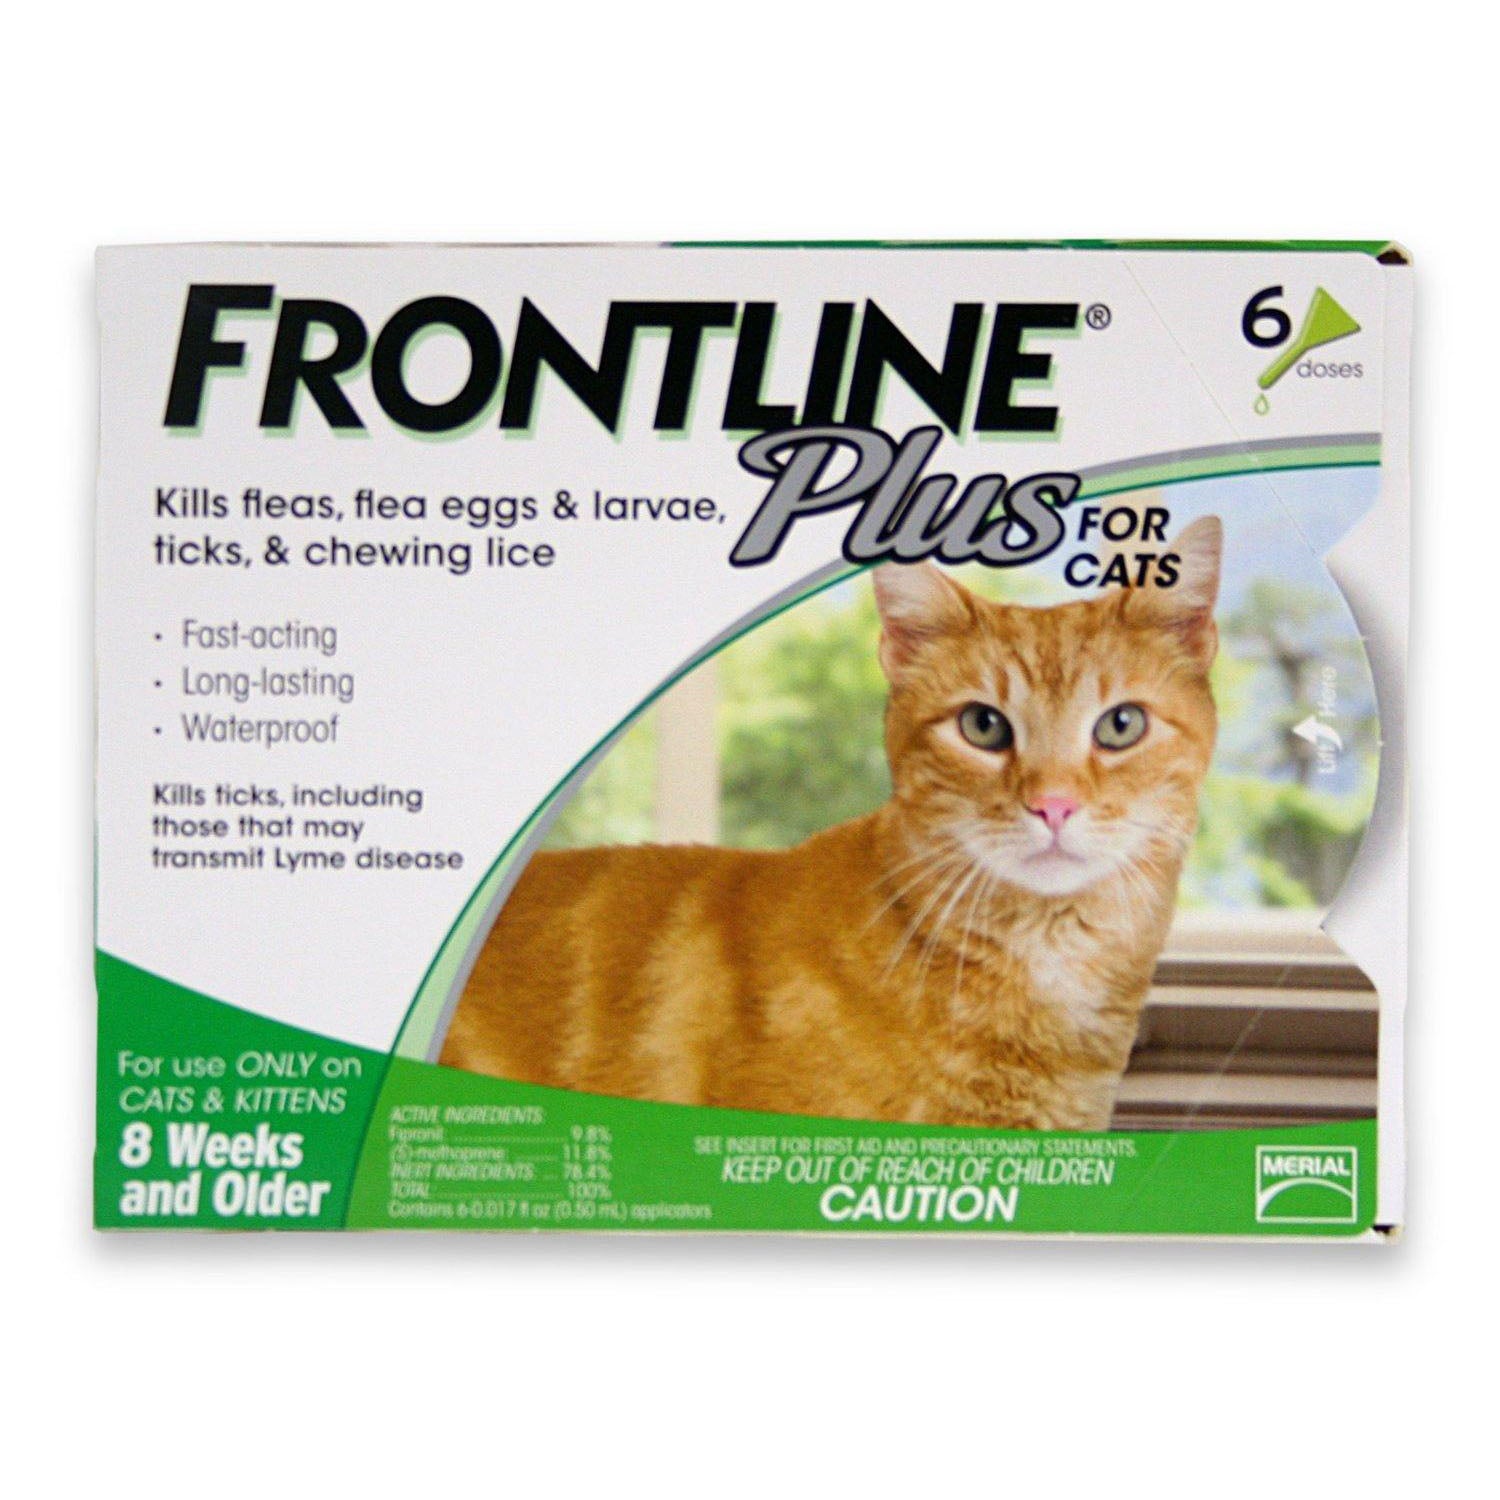 Frontline Plus for Cats & Kittens 6 month